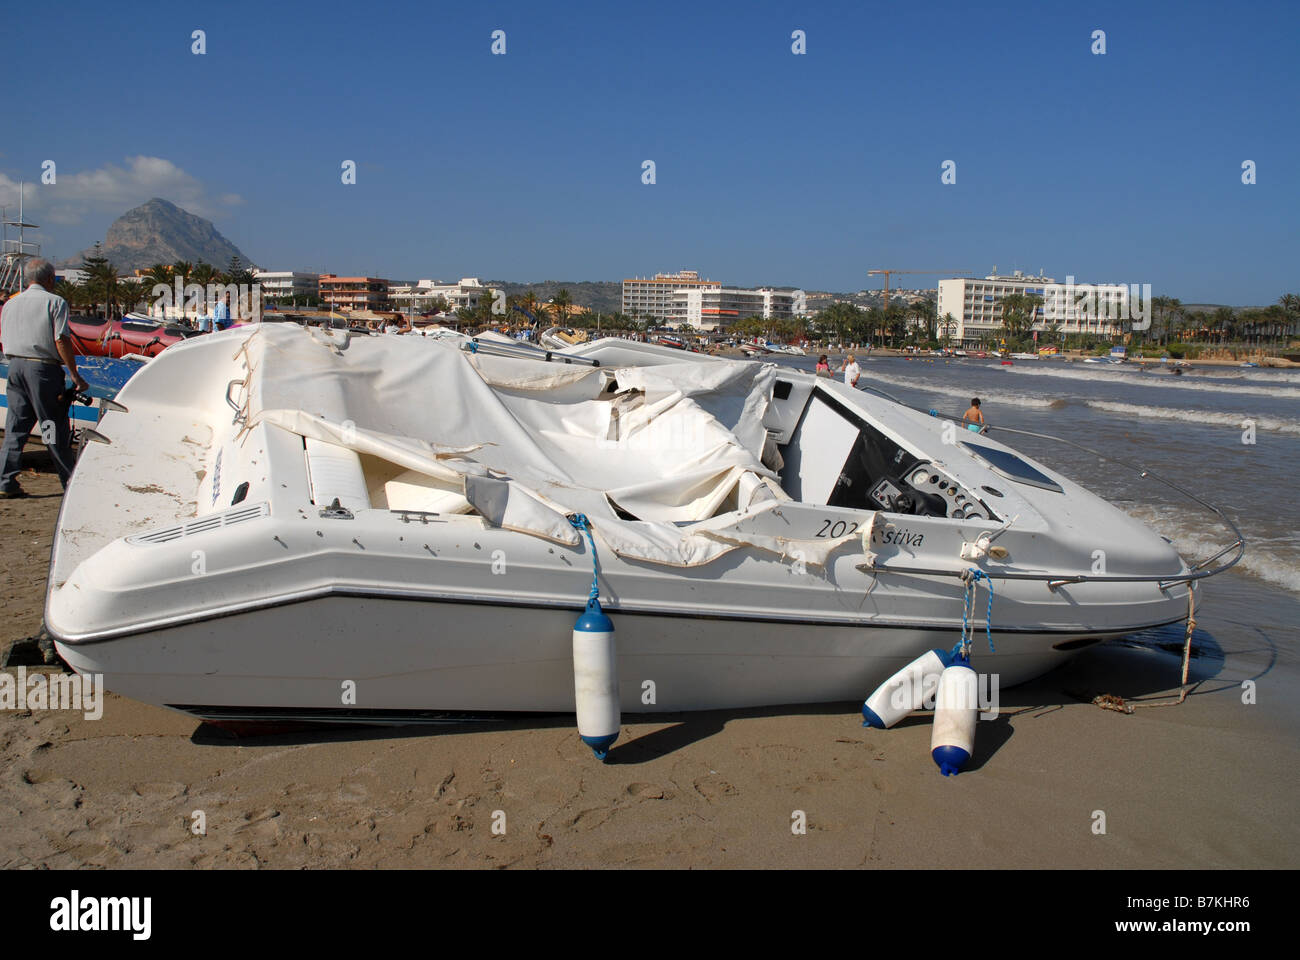 boats & debris washed up on Playa Arenal after storm, Oct 2007, Javea, Alicante Province, Comunidad Valenciana, Spain Stock Photo